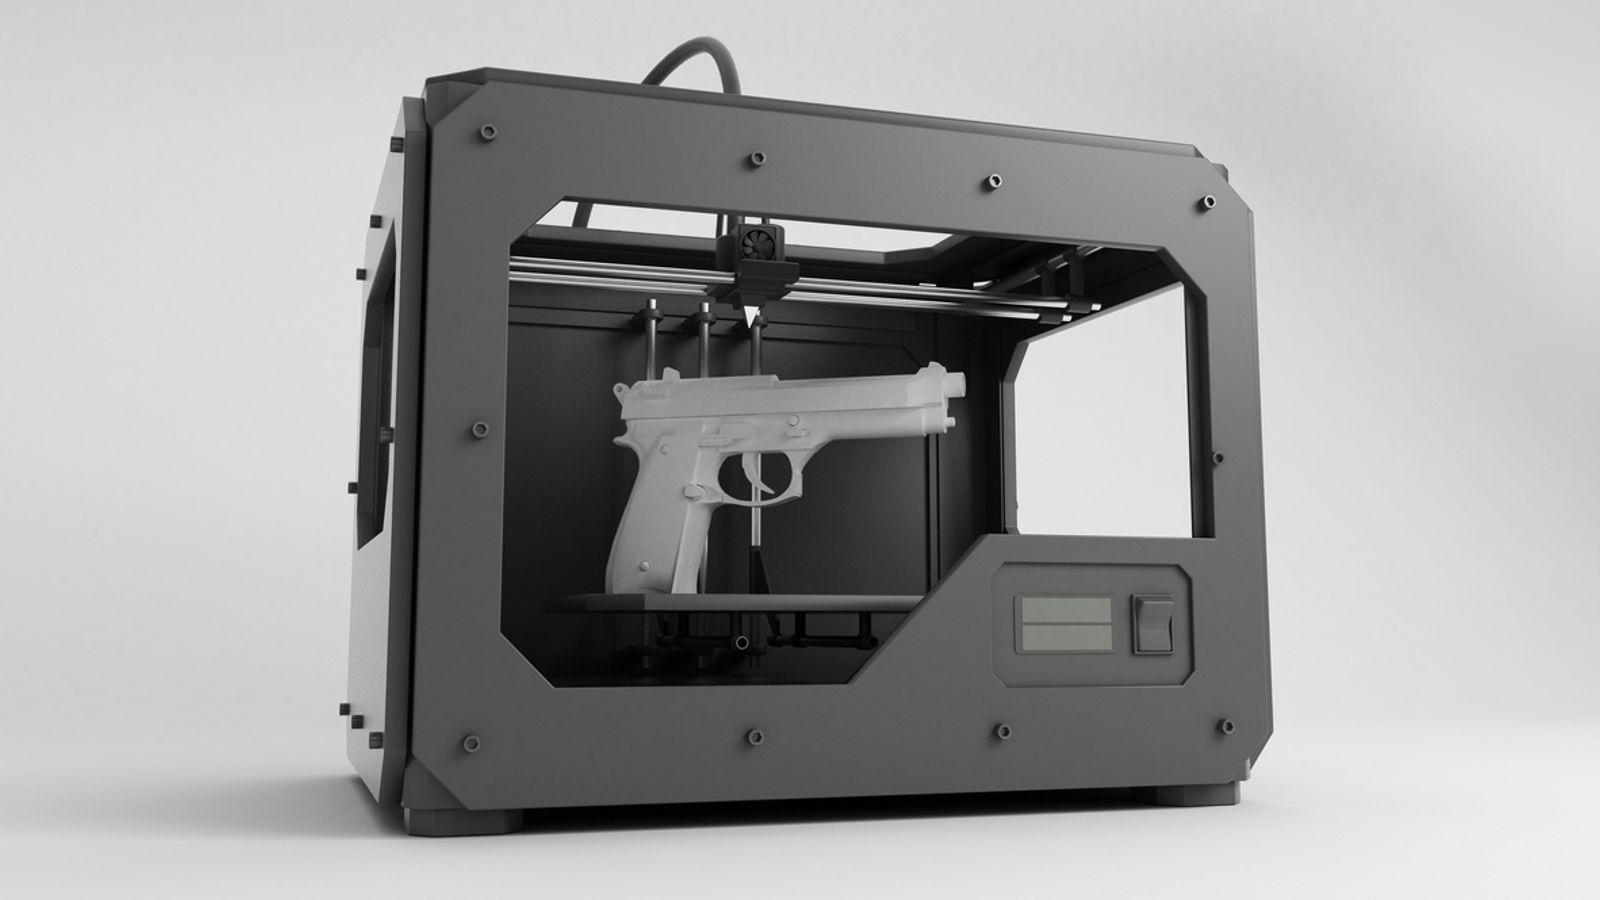 First Cases Of 3d Printed Guns In Scotland According To New Figures Uk News Sky News